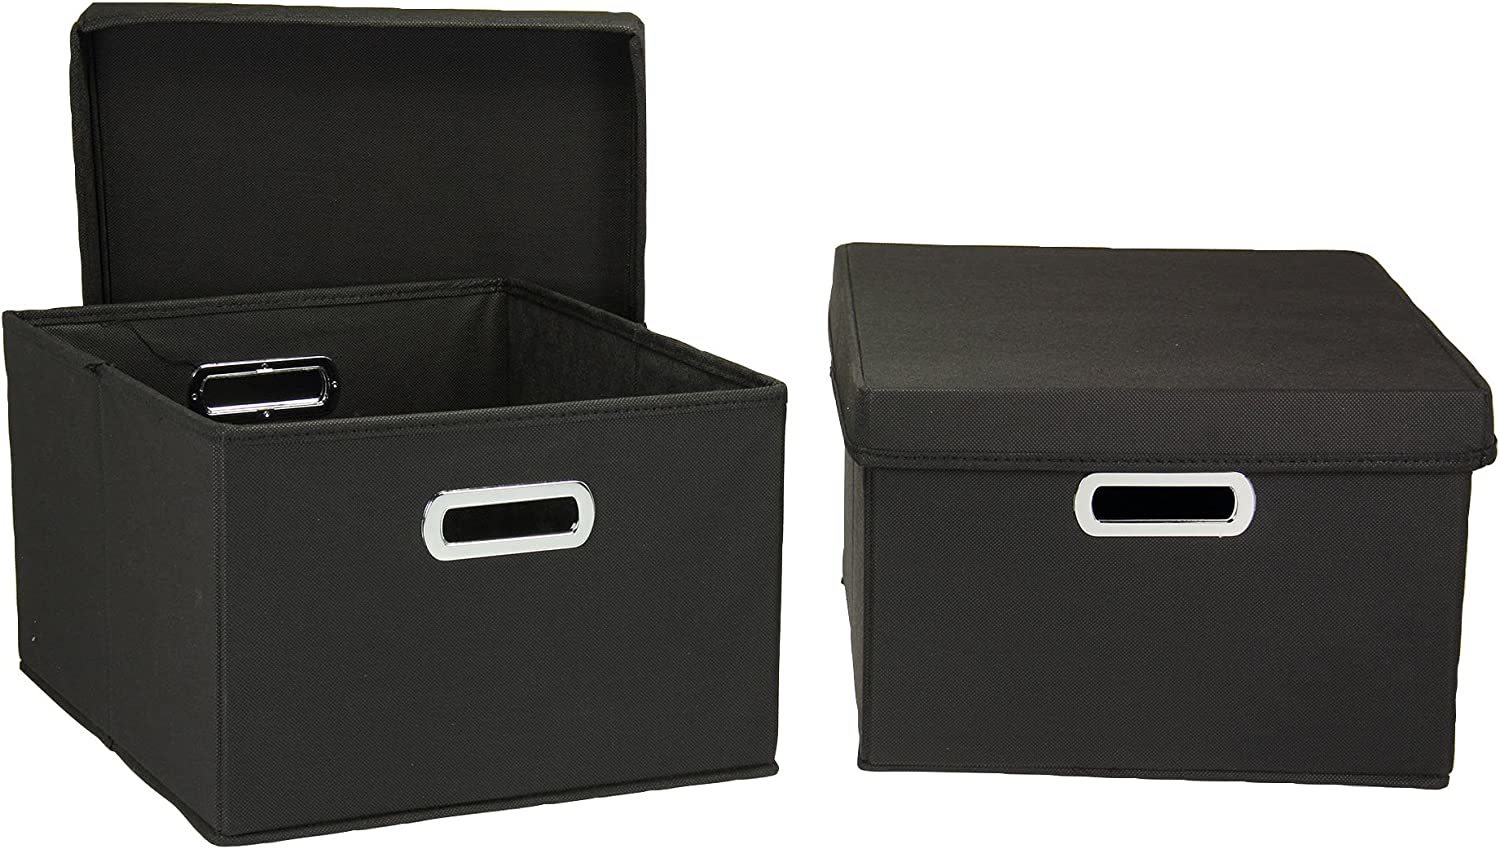 Household Essentials Fabric Storage Boxes With Lids And Handles, Black - $31.99